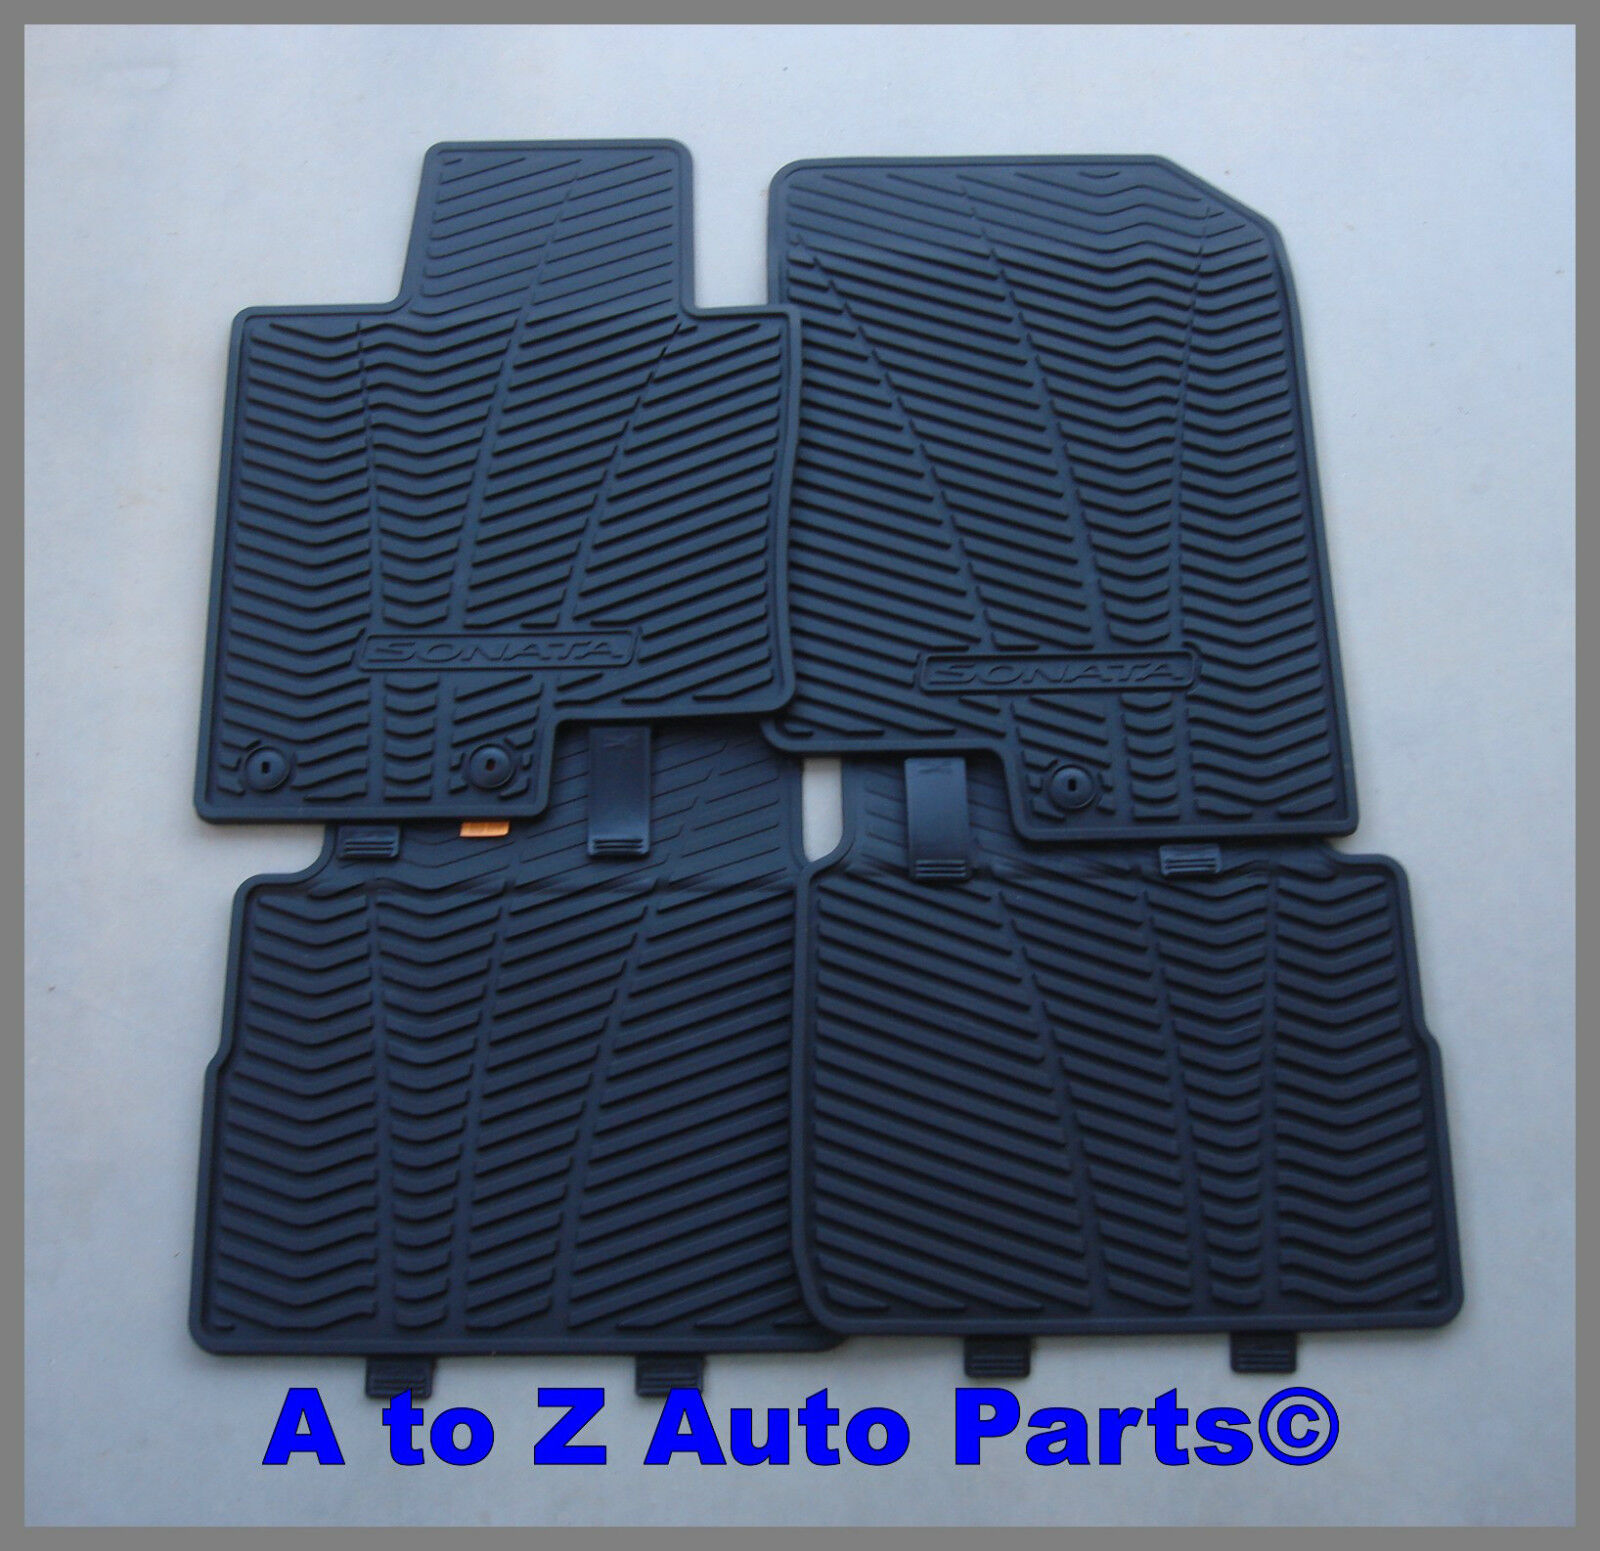 NEW 2011-2014 Hyundai SONATA Tough Rubber ALL WEATHER Front and Rear Floor Mats